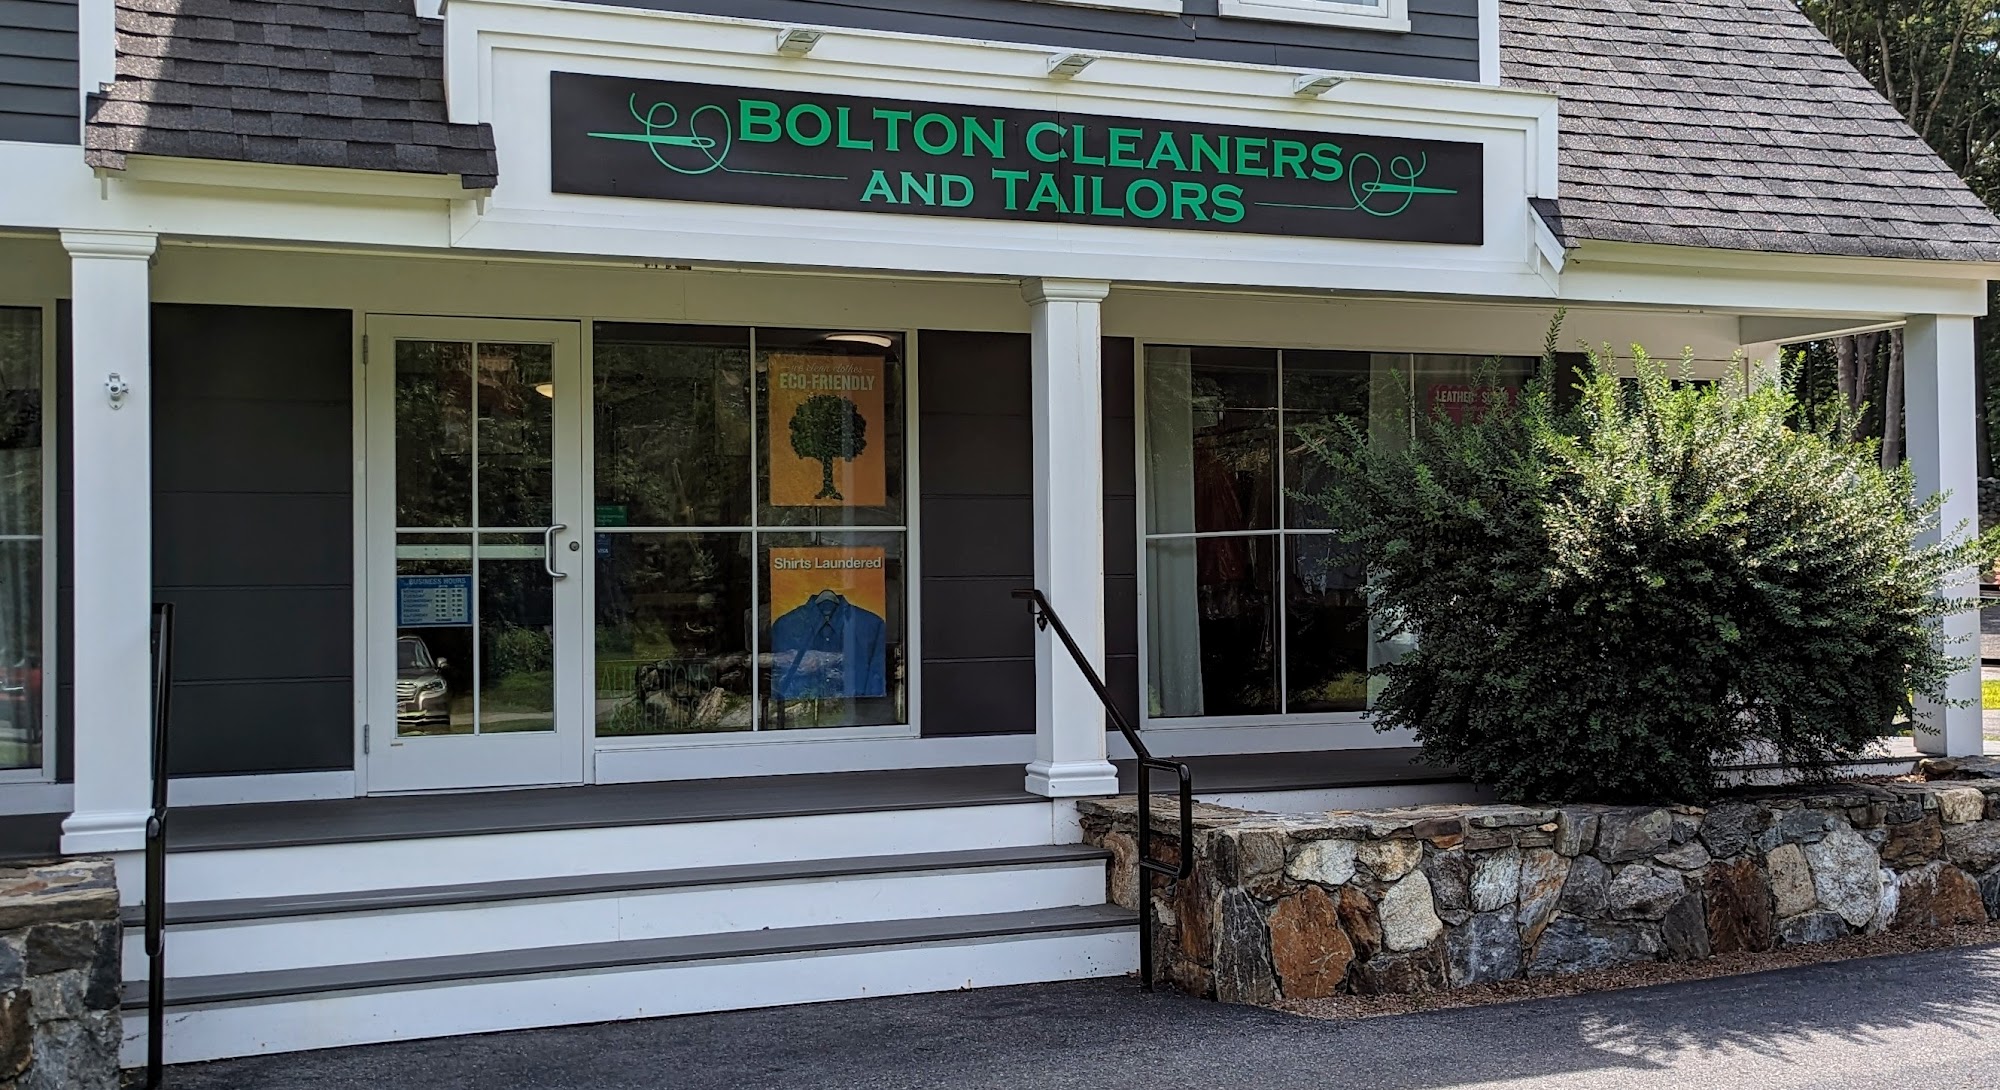 Bolton Cleaners and Tailors